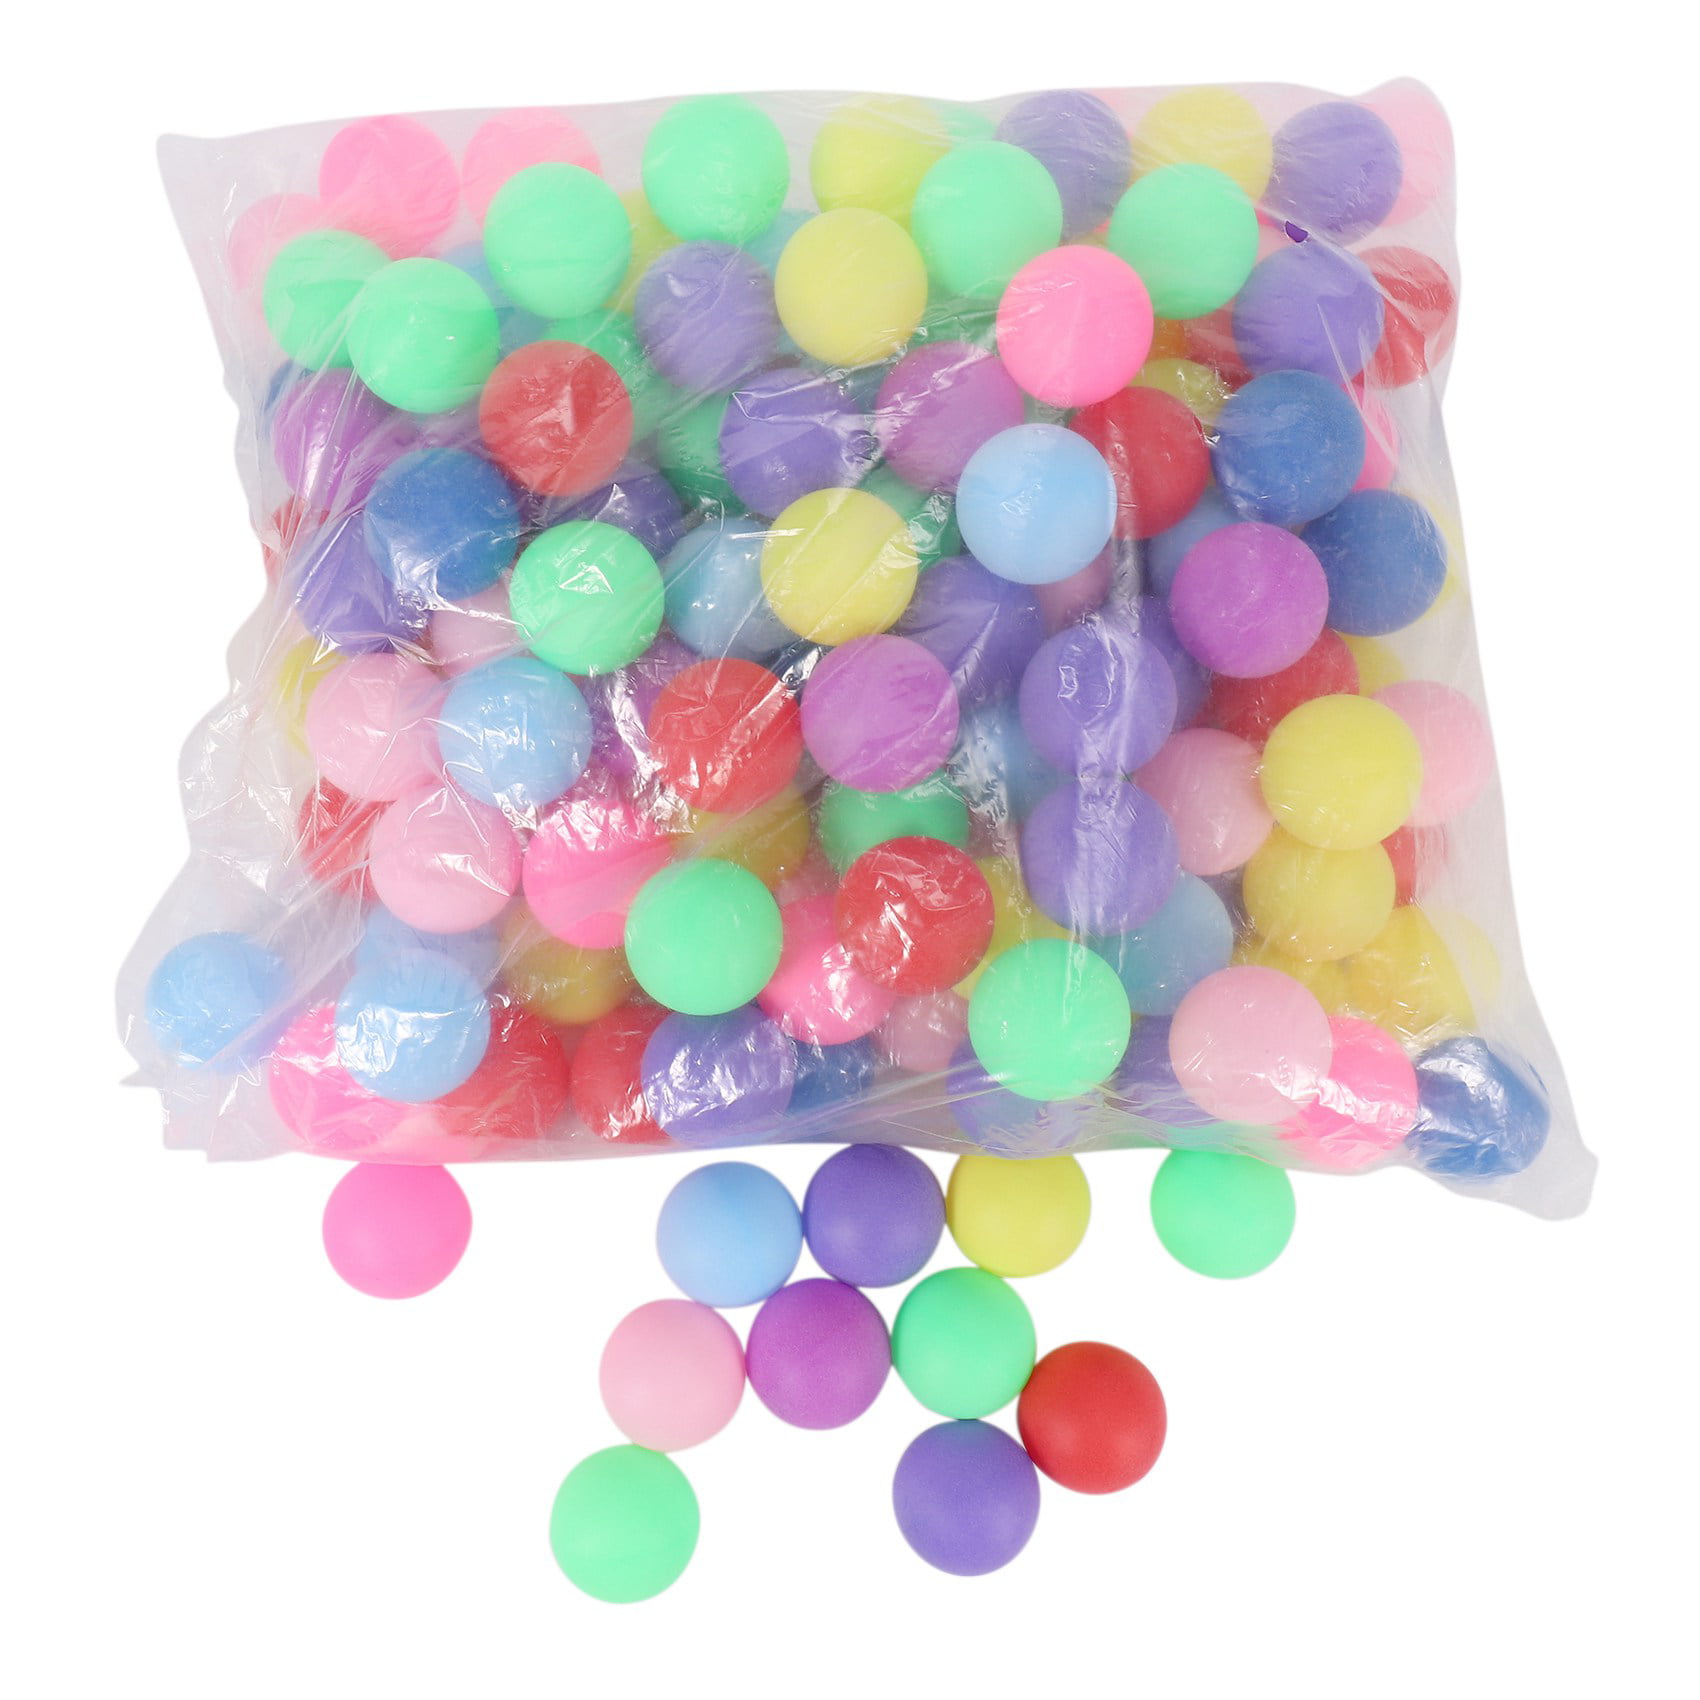 100/150Pcs Ping Pong Ball White & Orange Plastic Table-tennis Sports Toy Accesso 